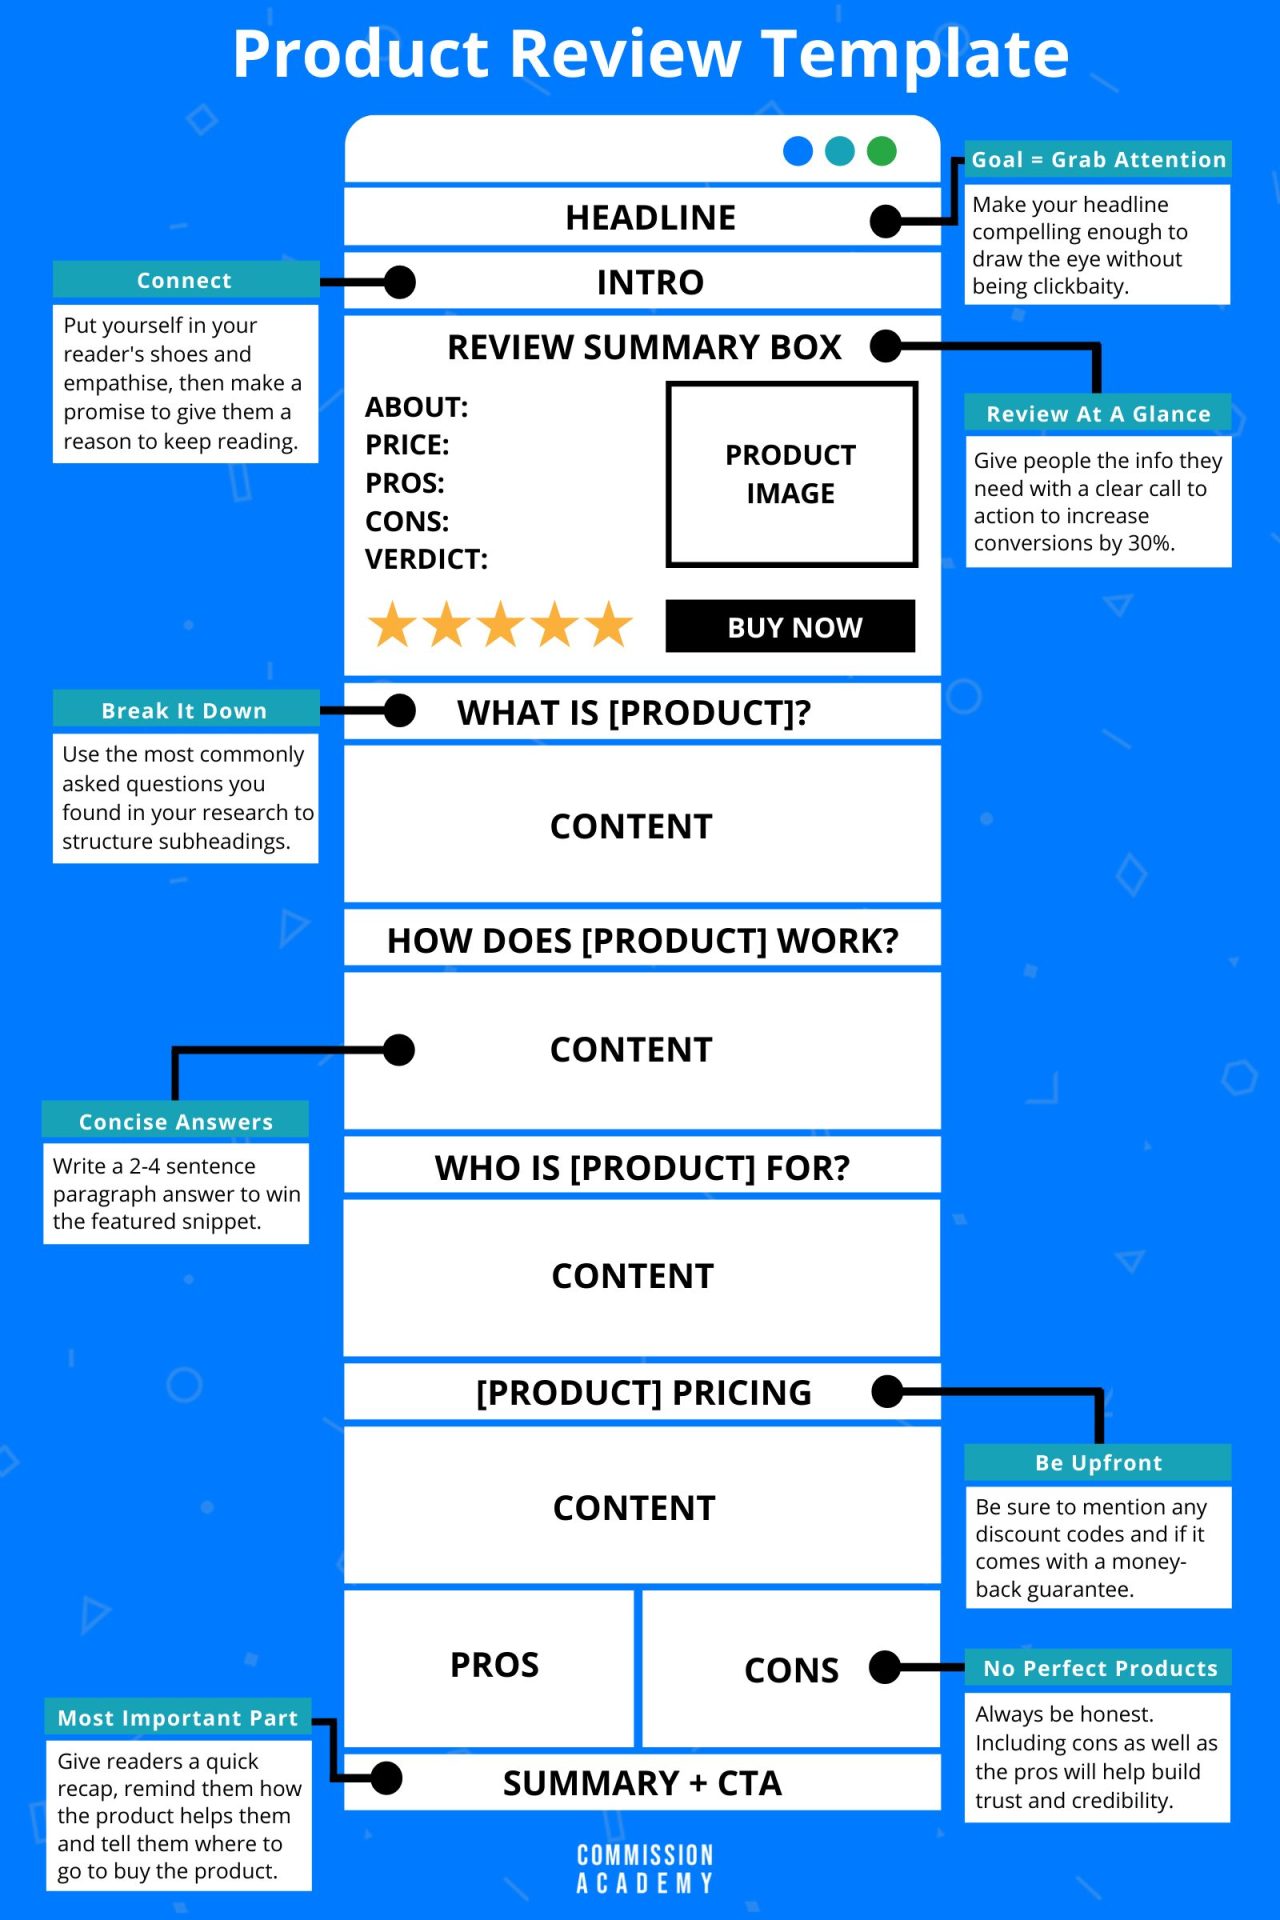 How To Write A Product Review That Converts